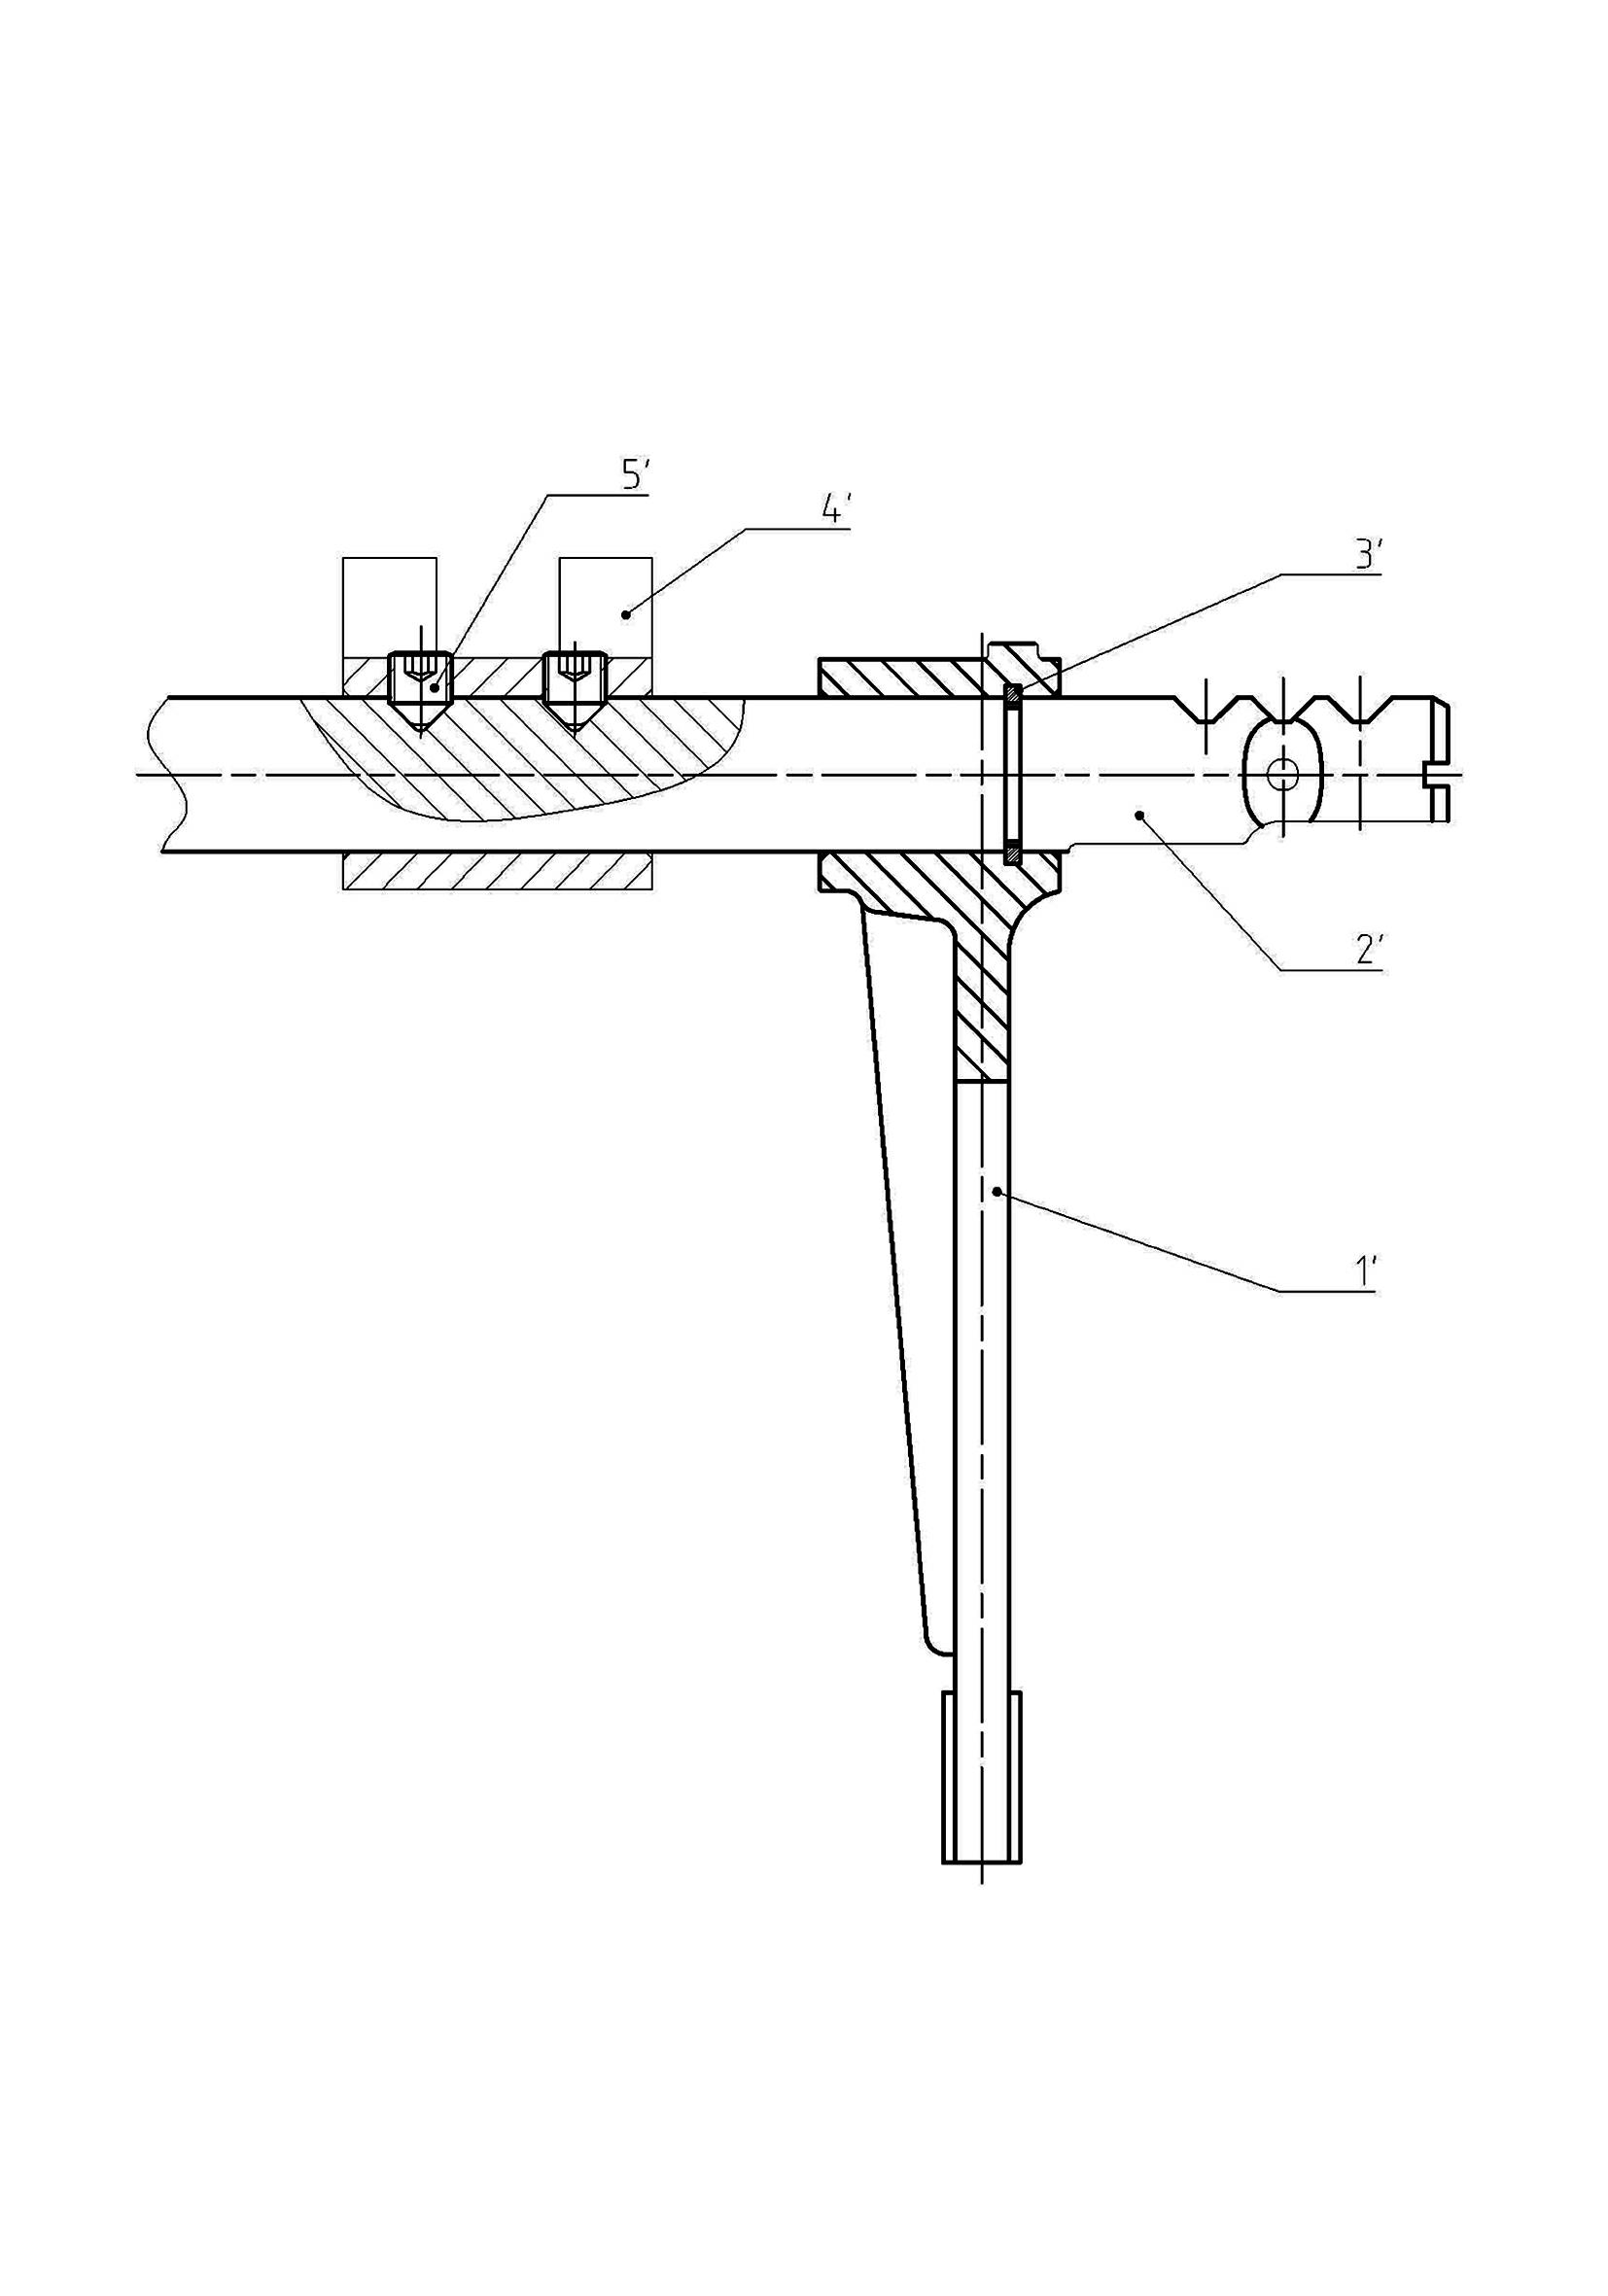 Self-locking and interlocking mechanism for cylindrical shell speed changer